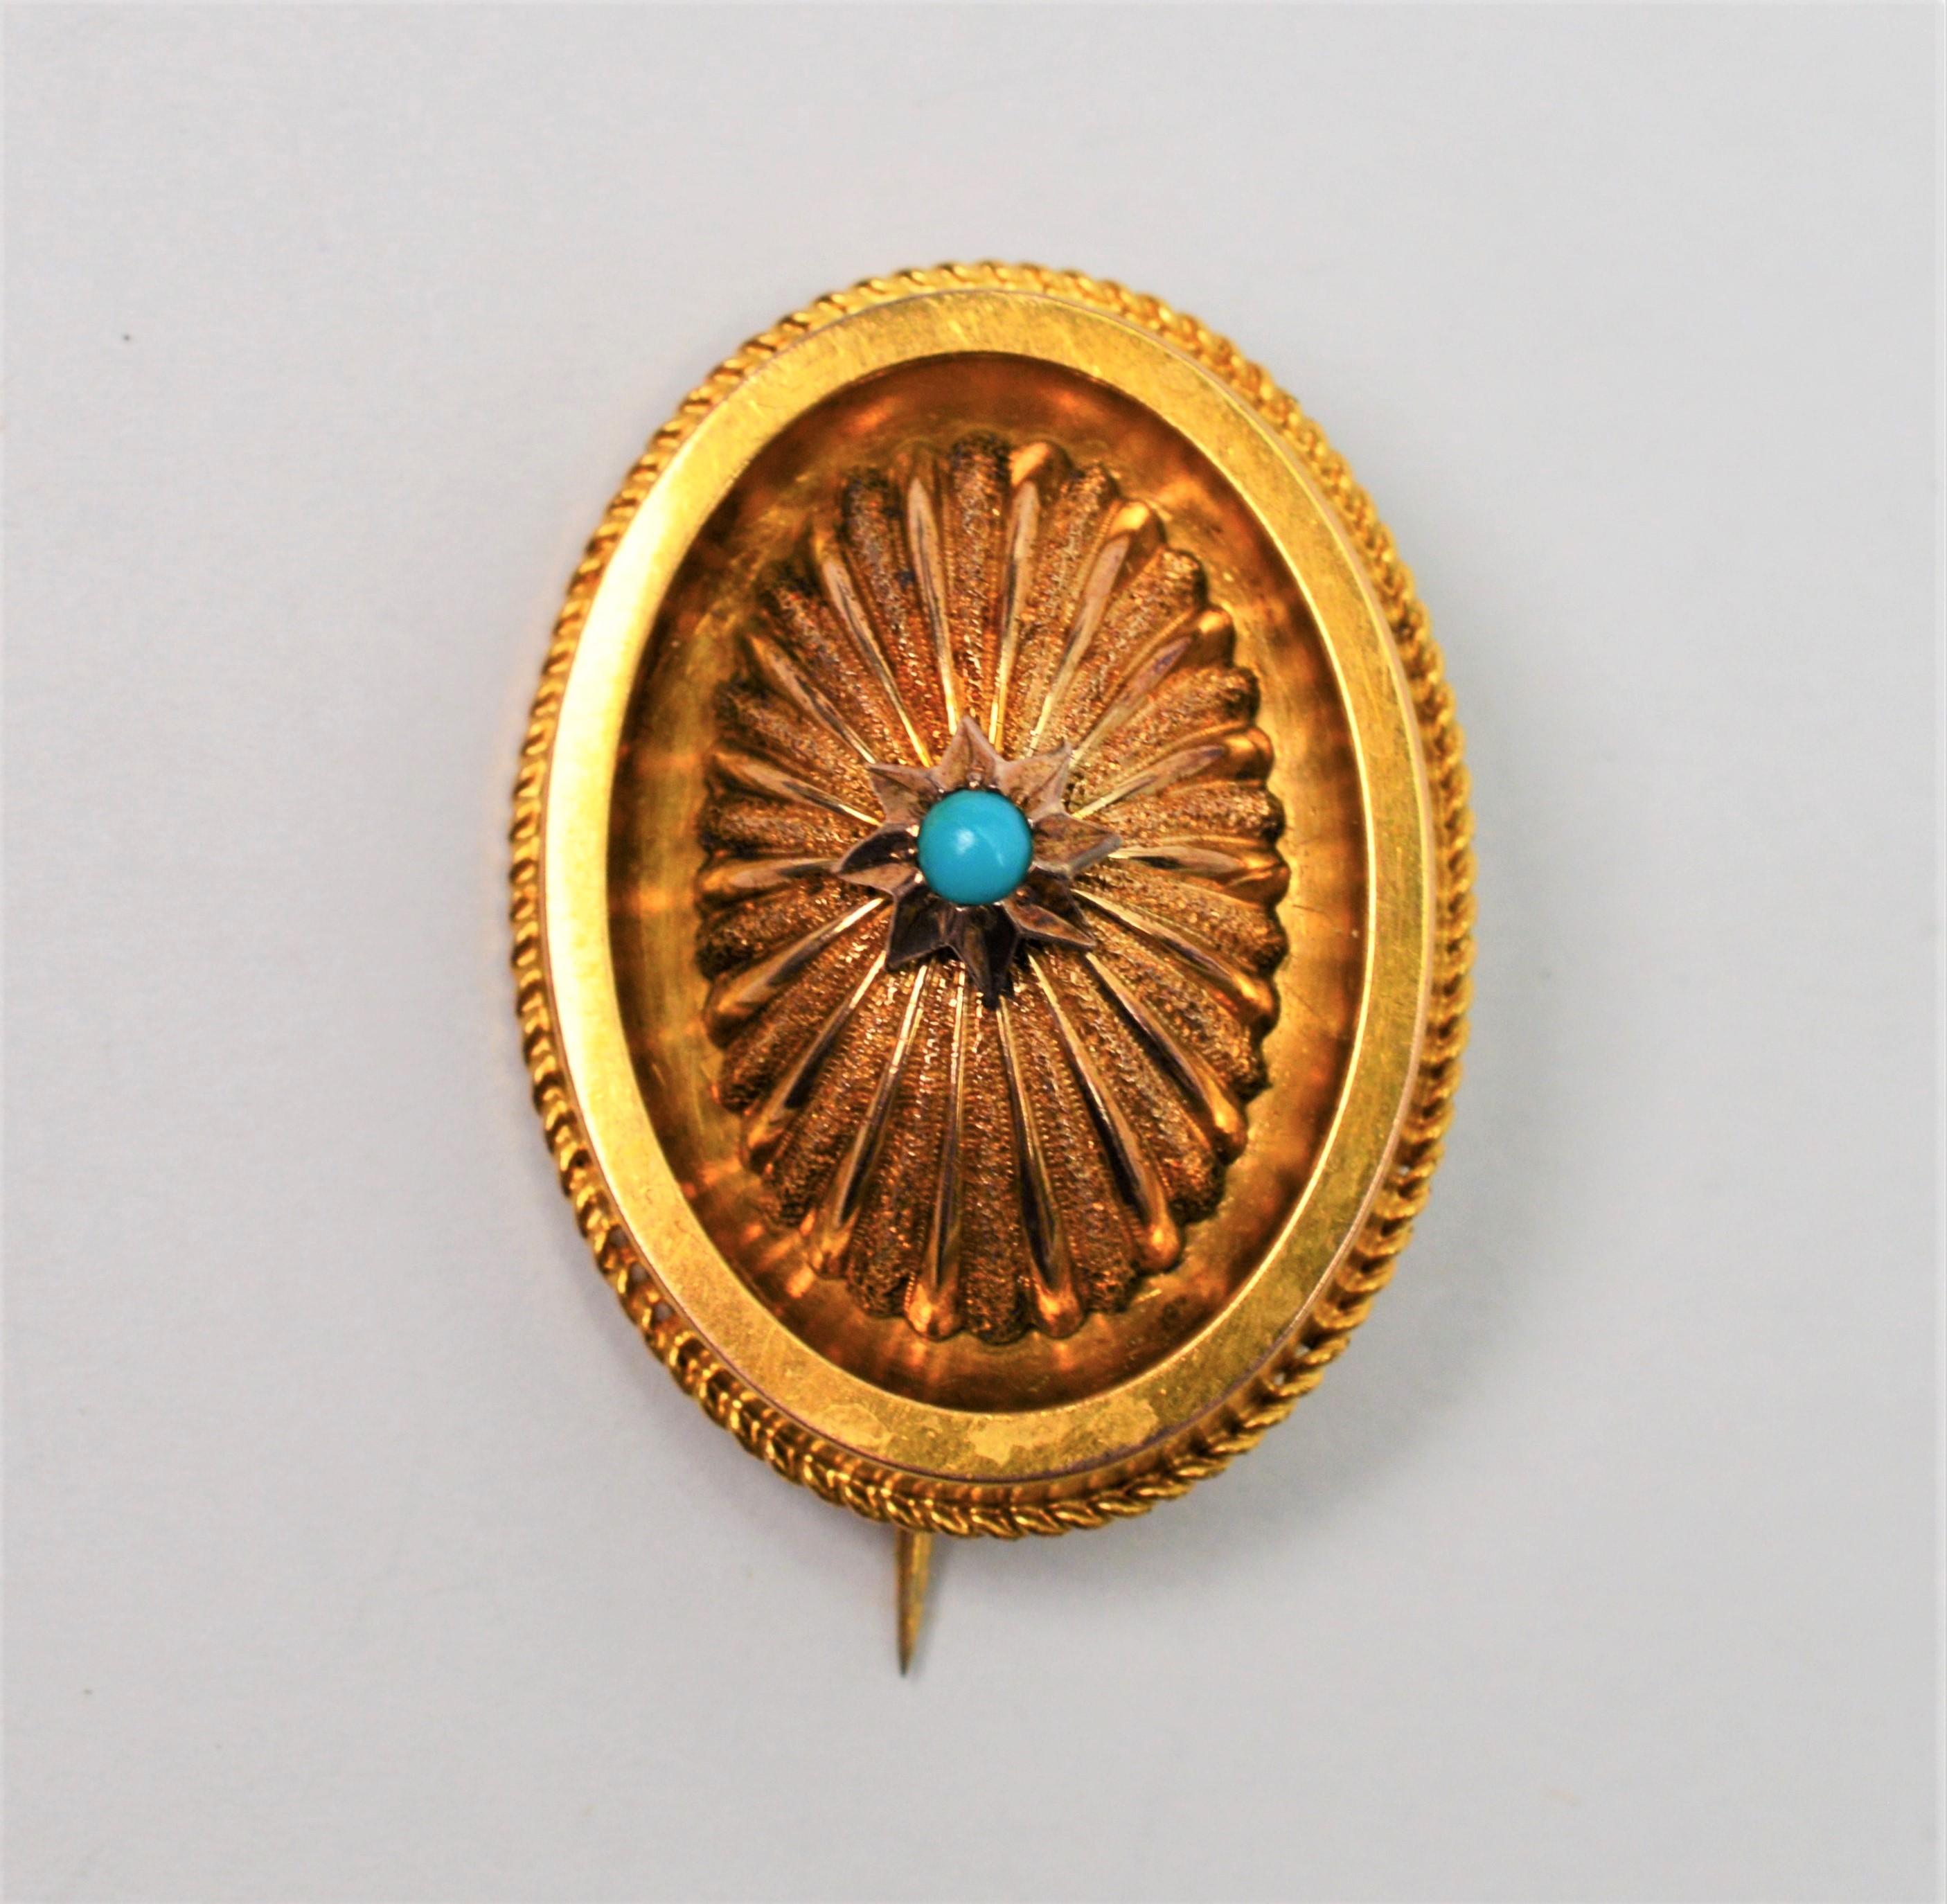 A classic accent for a scarf or pashmina. In a petite oval shape measuring 1-1/4 x 7/8 inches, the fourteen karat 14K yellow gold brooch has well defined dimensional details with one quarter inch depth rising to the medallion's pinnacle center